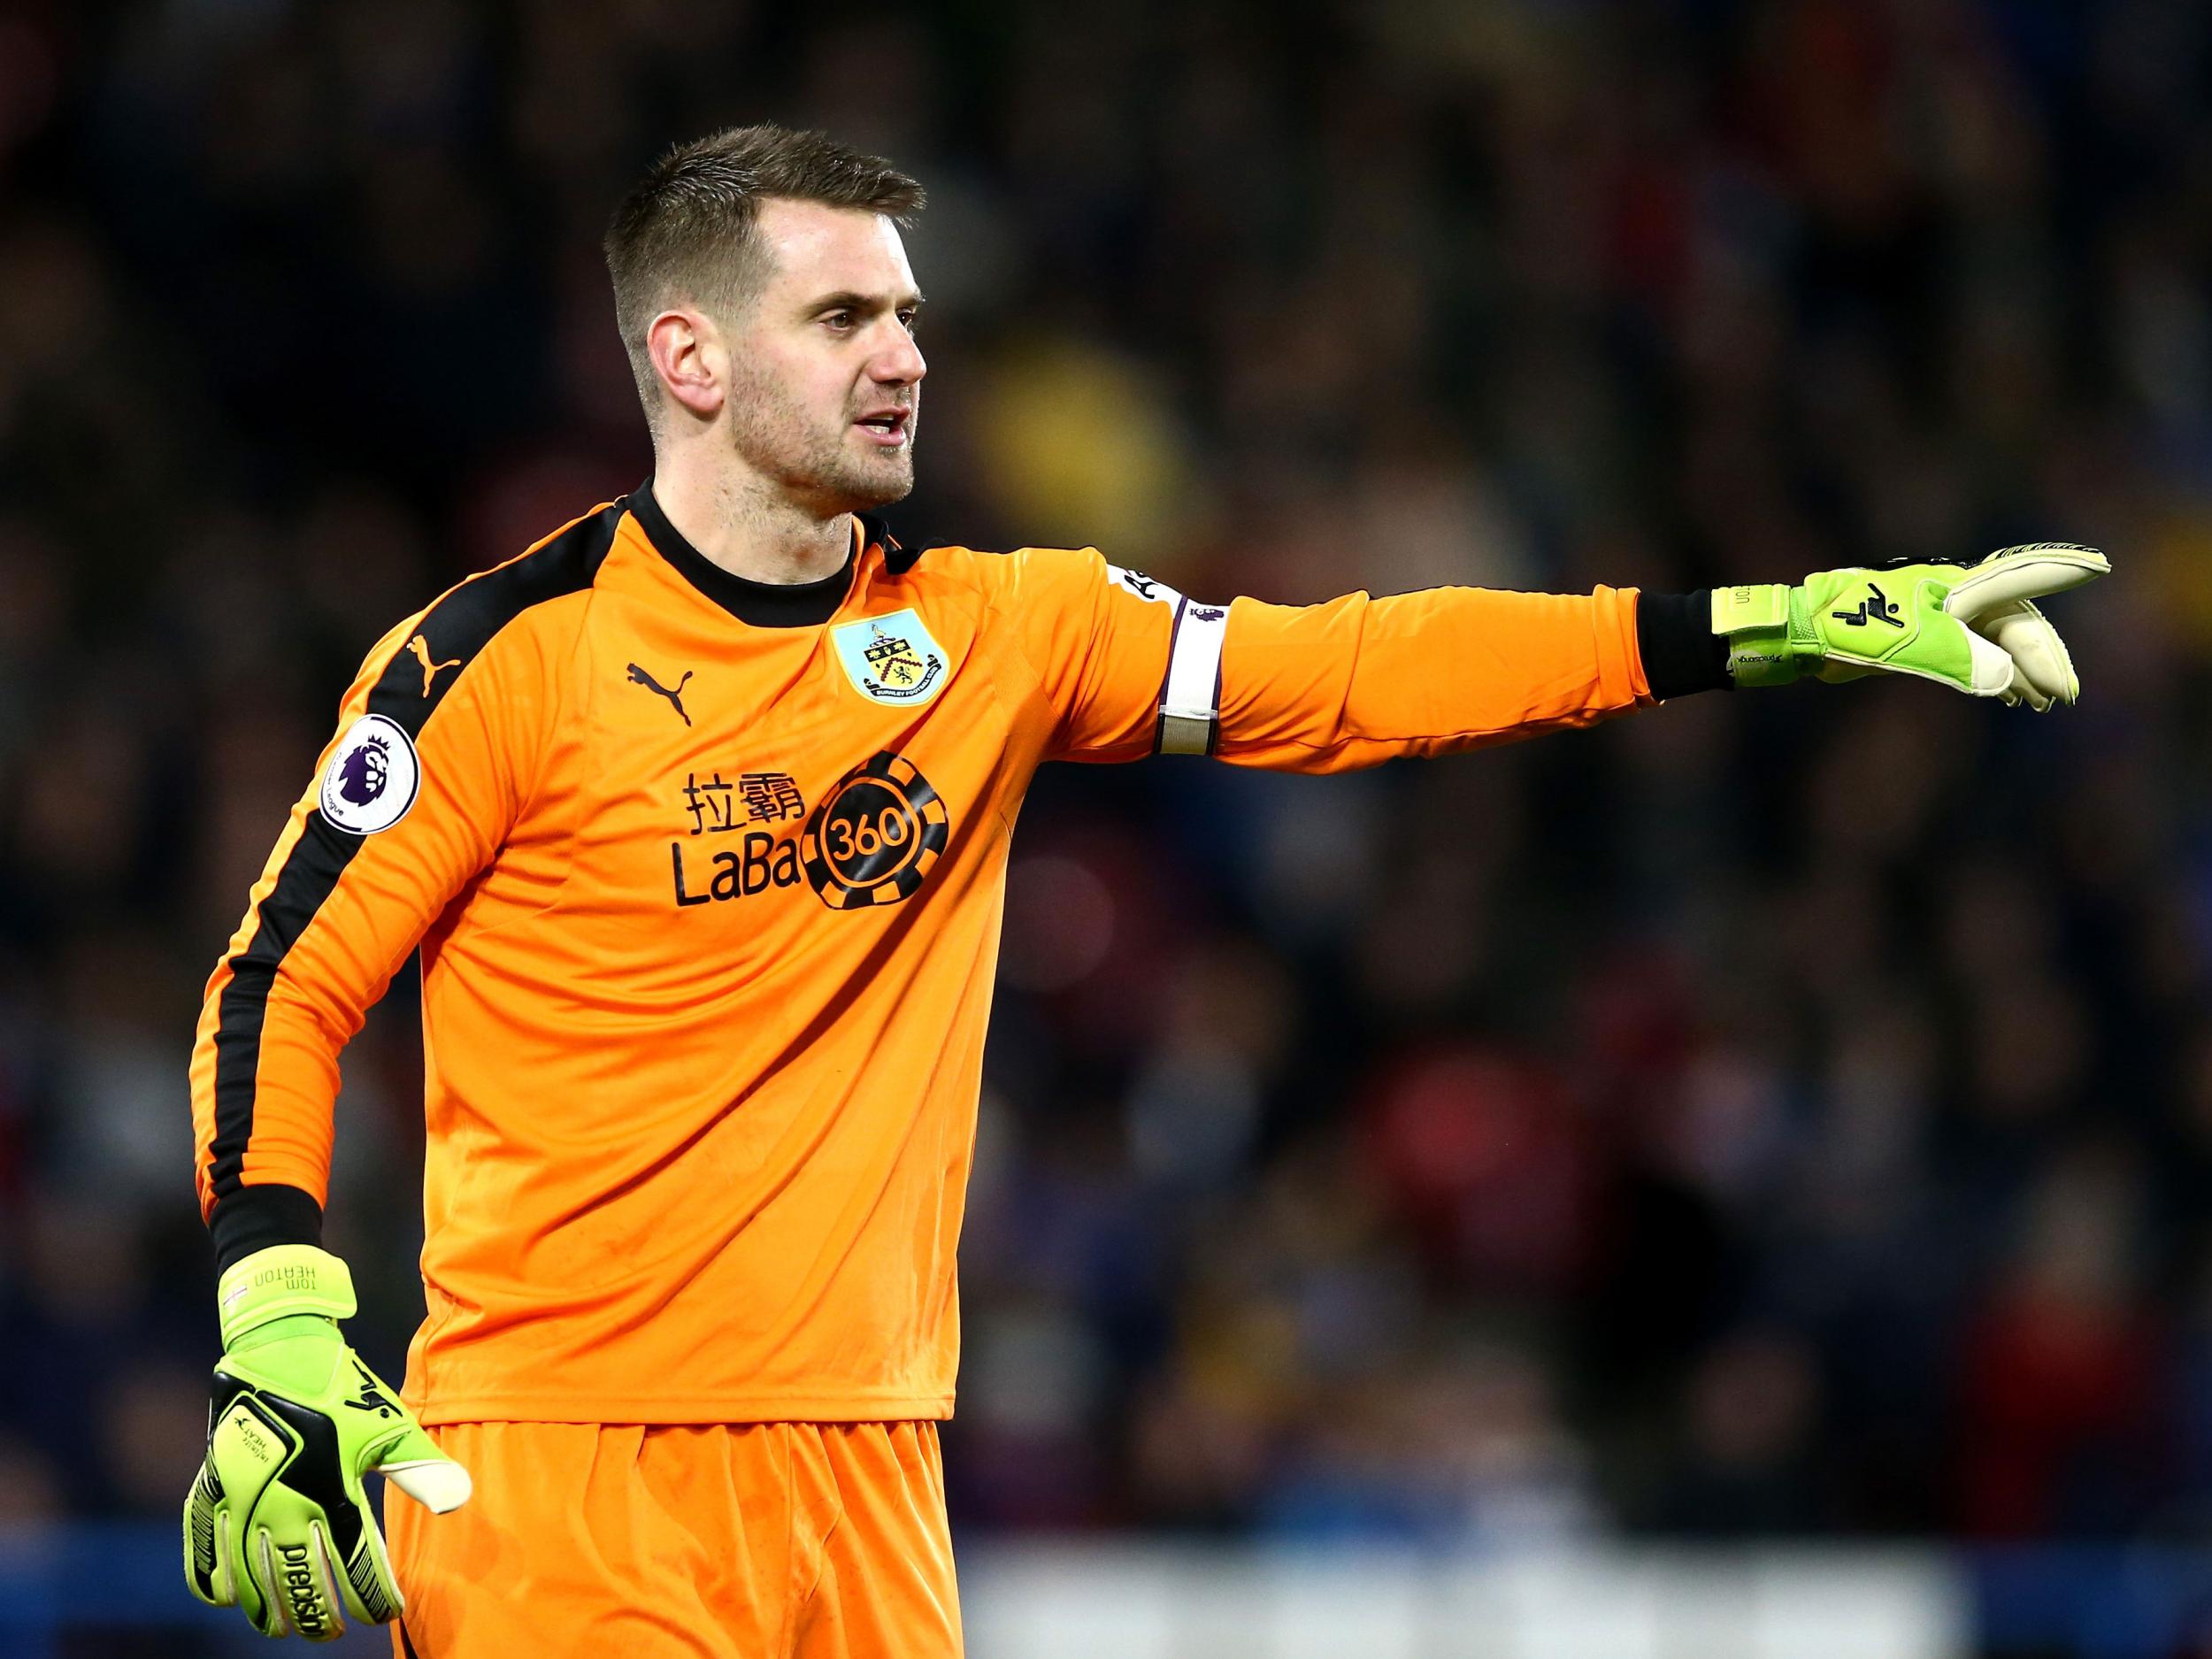 Heaton has been in good form for Burnley this season